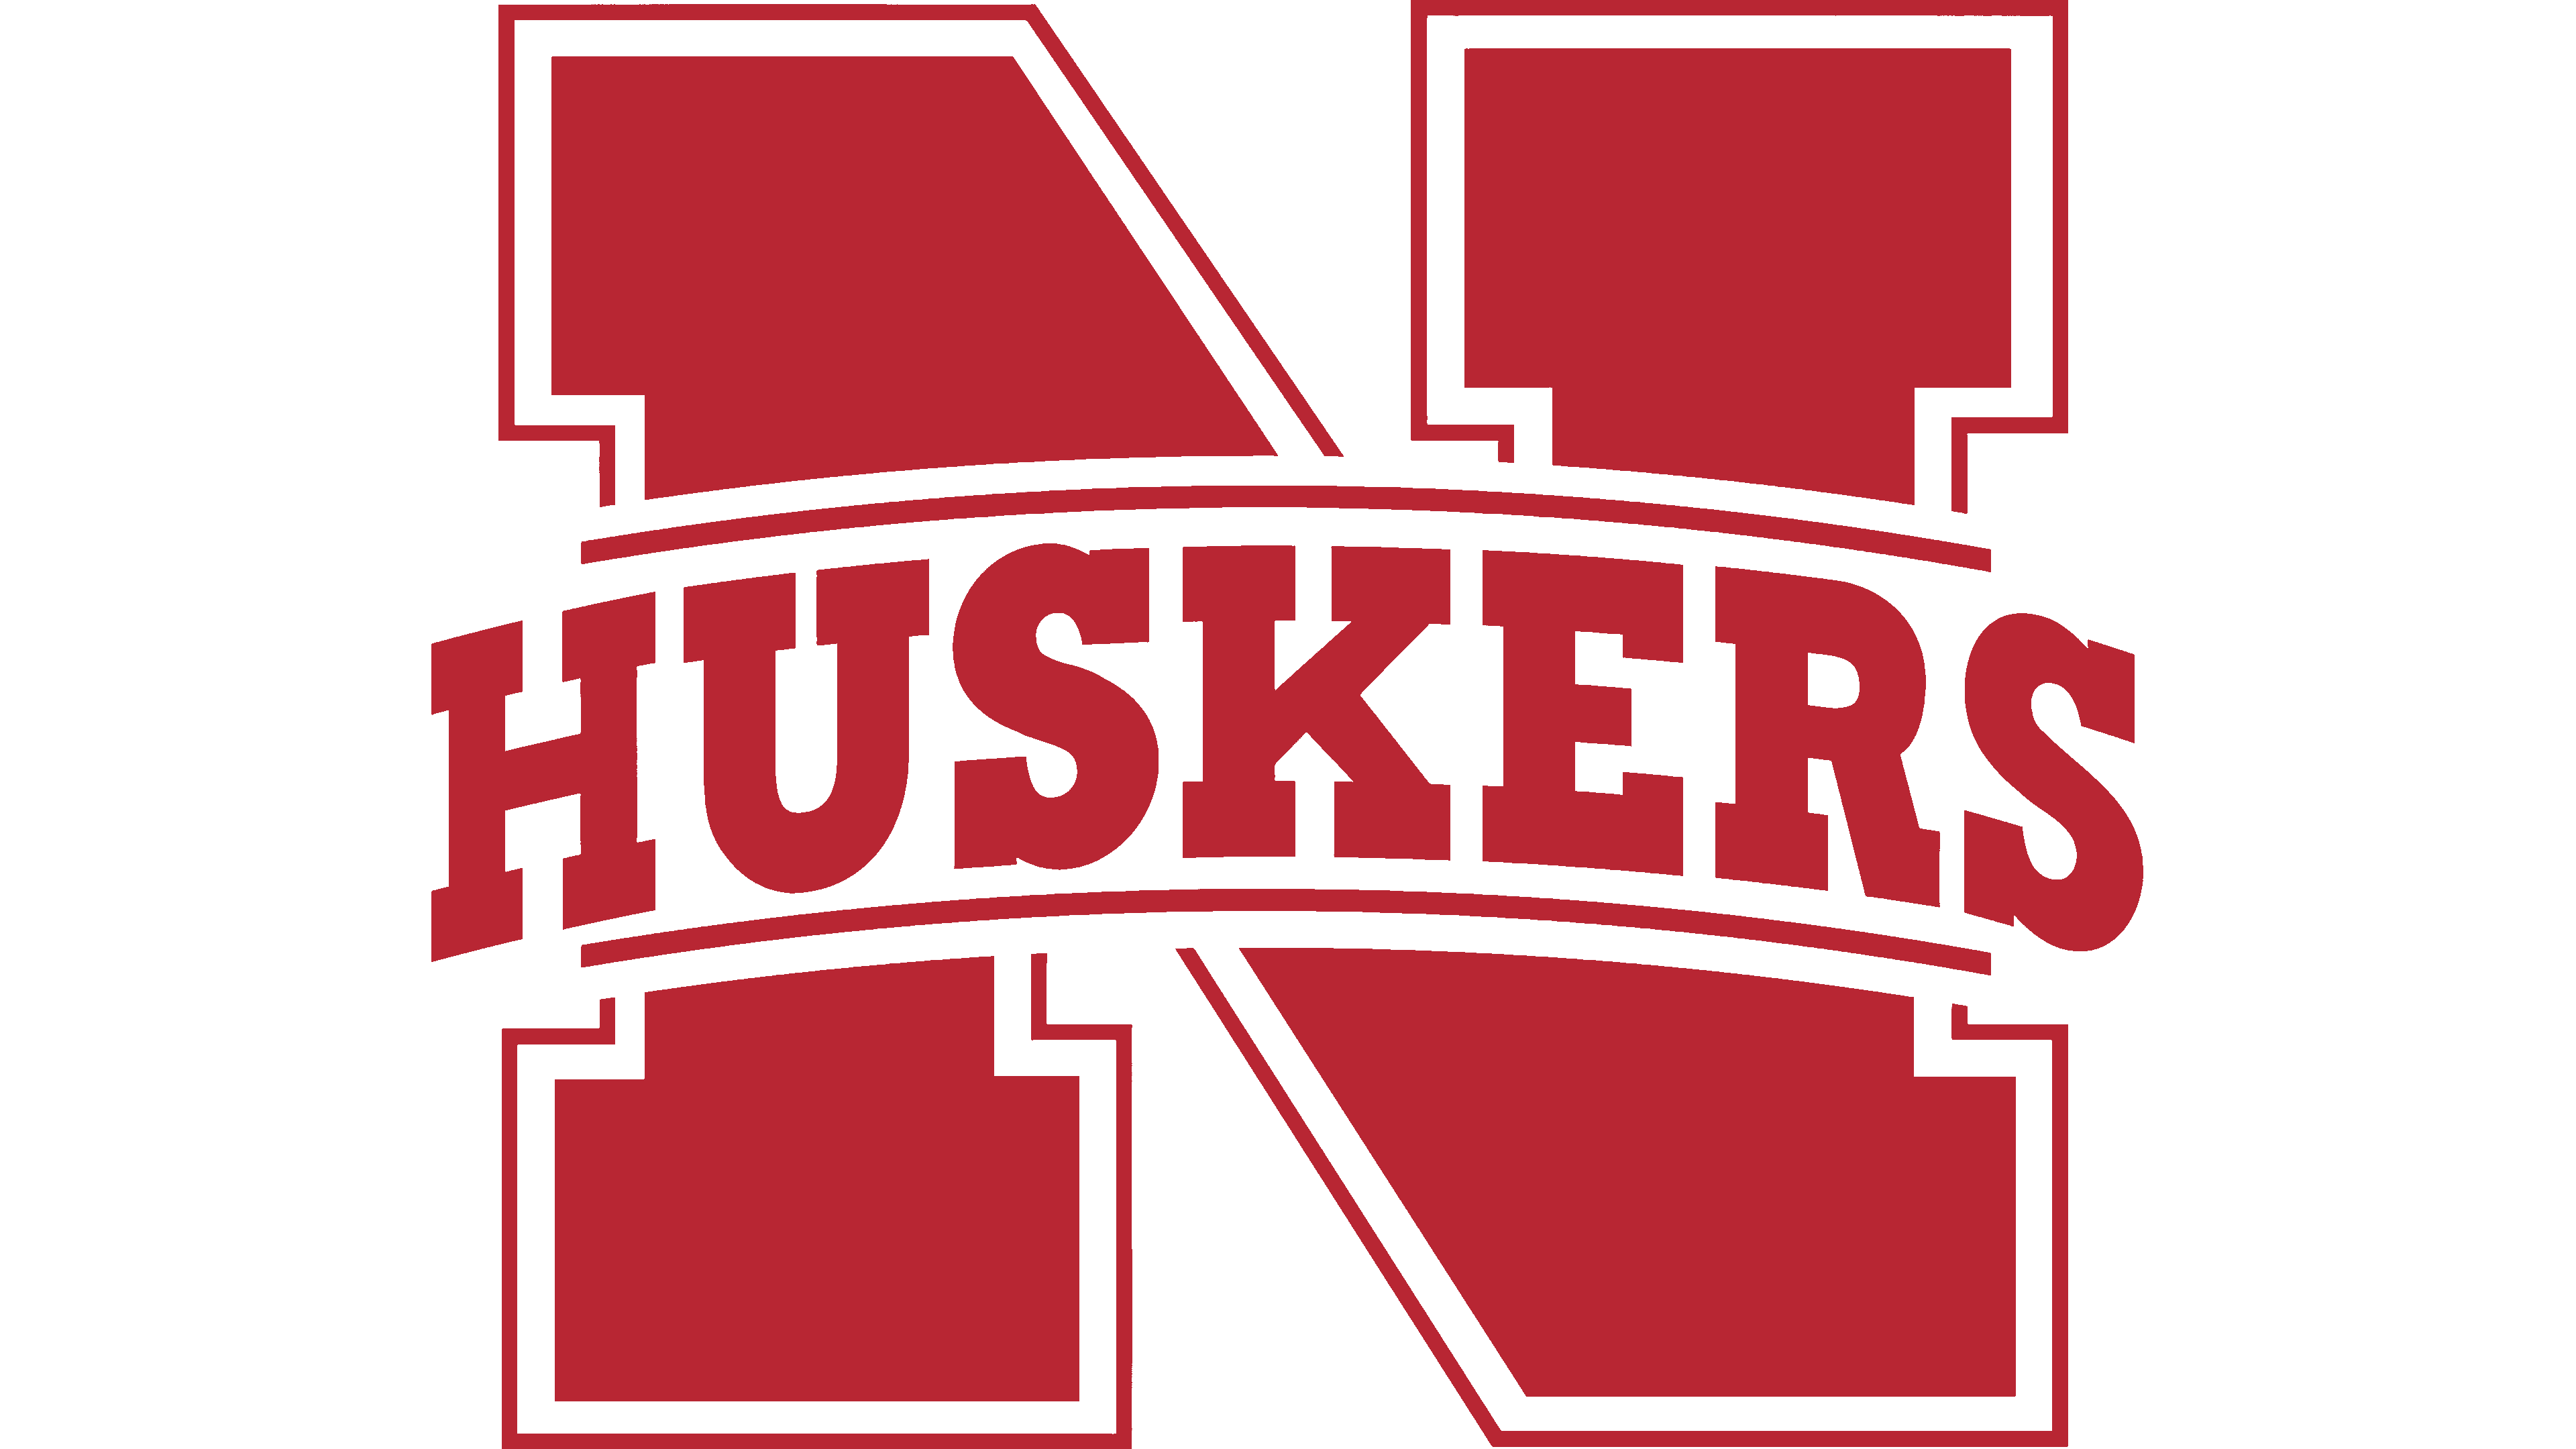 Nebraska Cornhuskers Logo | The most famous brands and company logos in the  world